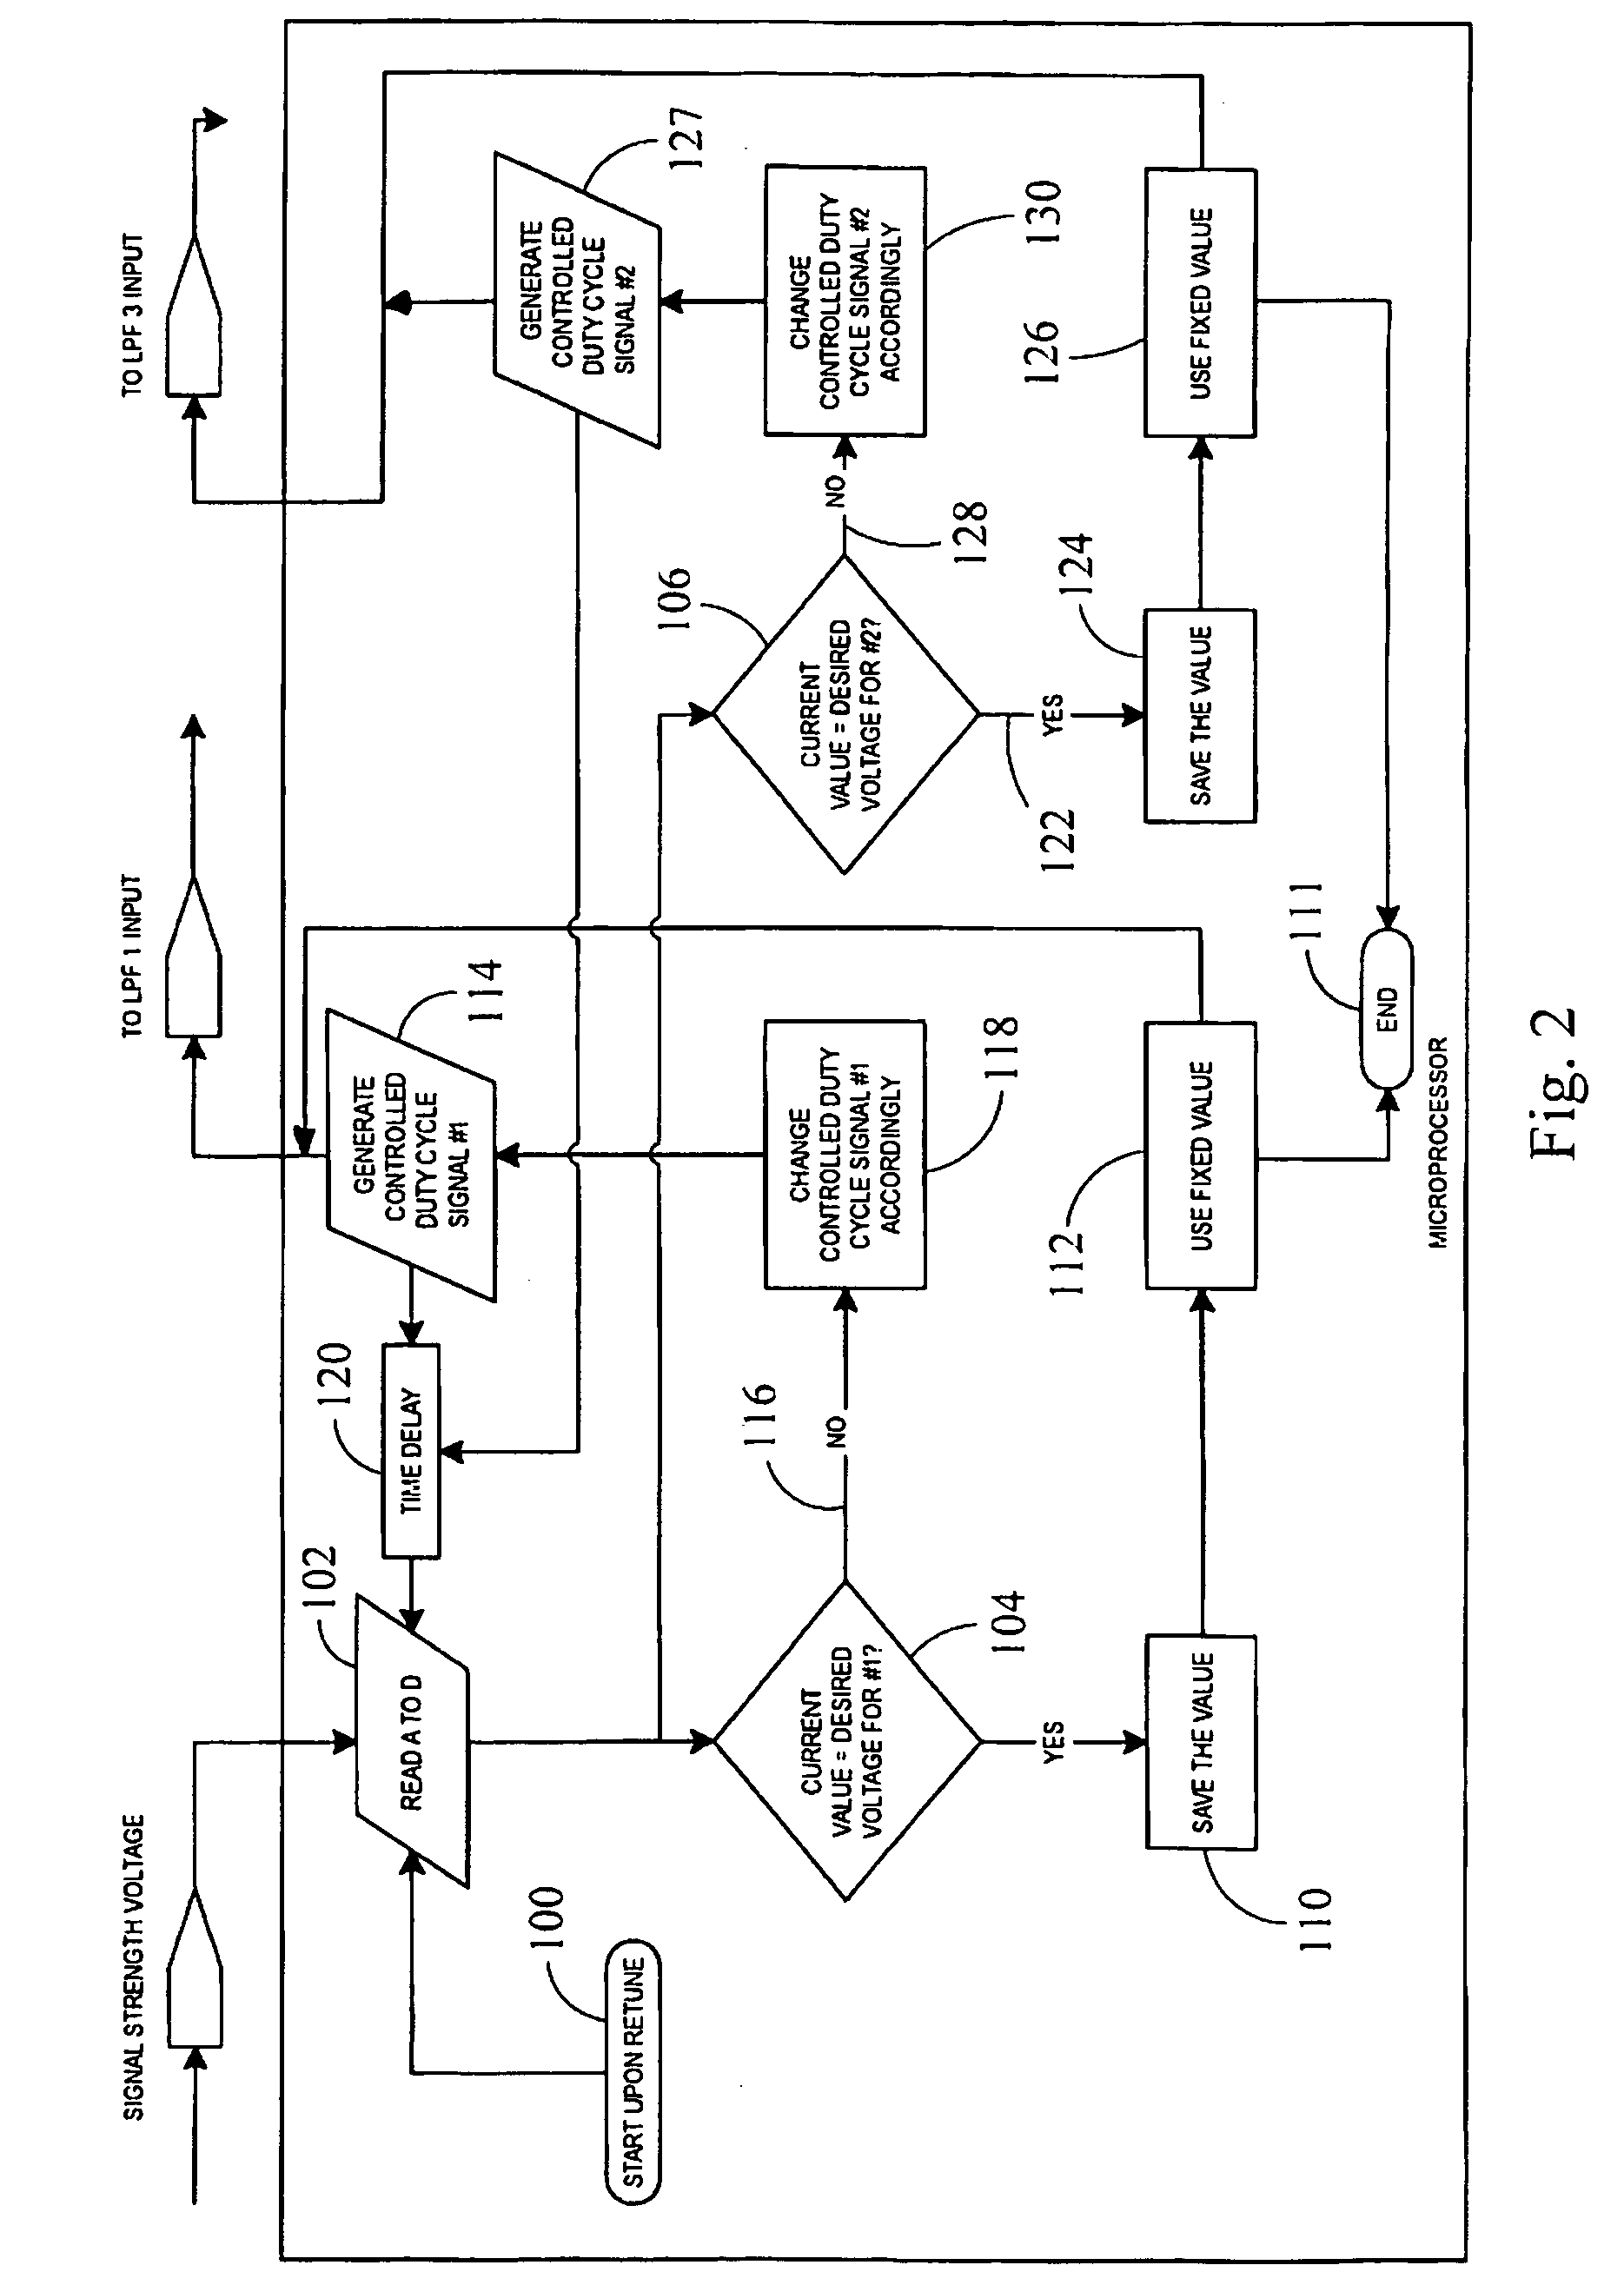 System for creating a programmable tuning voltage